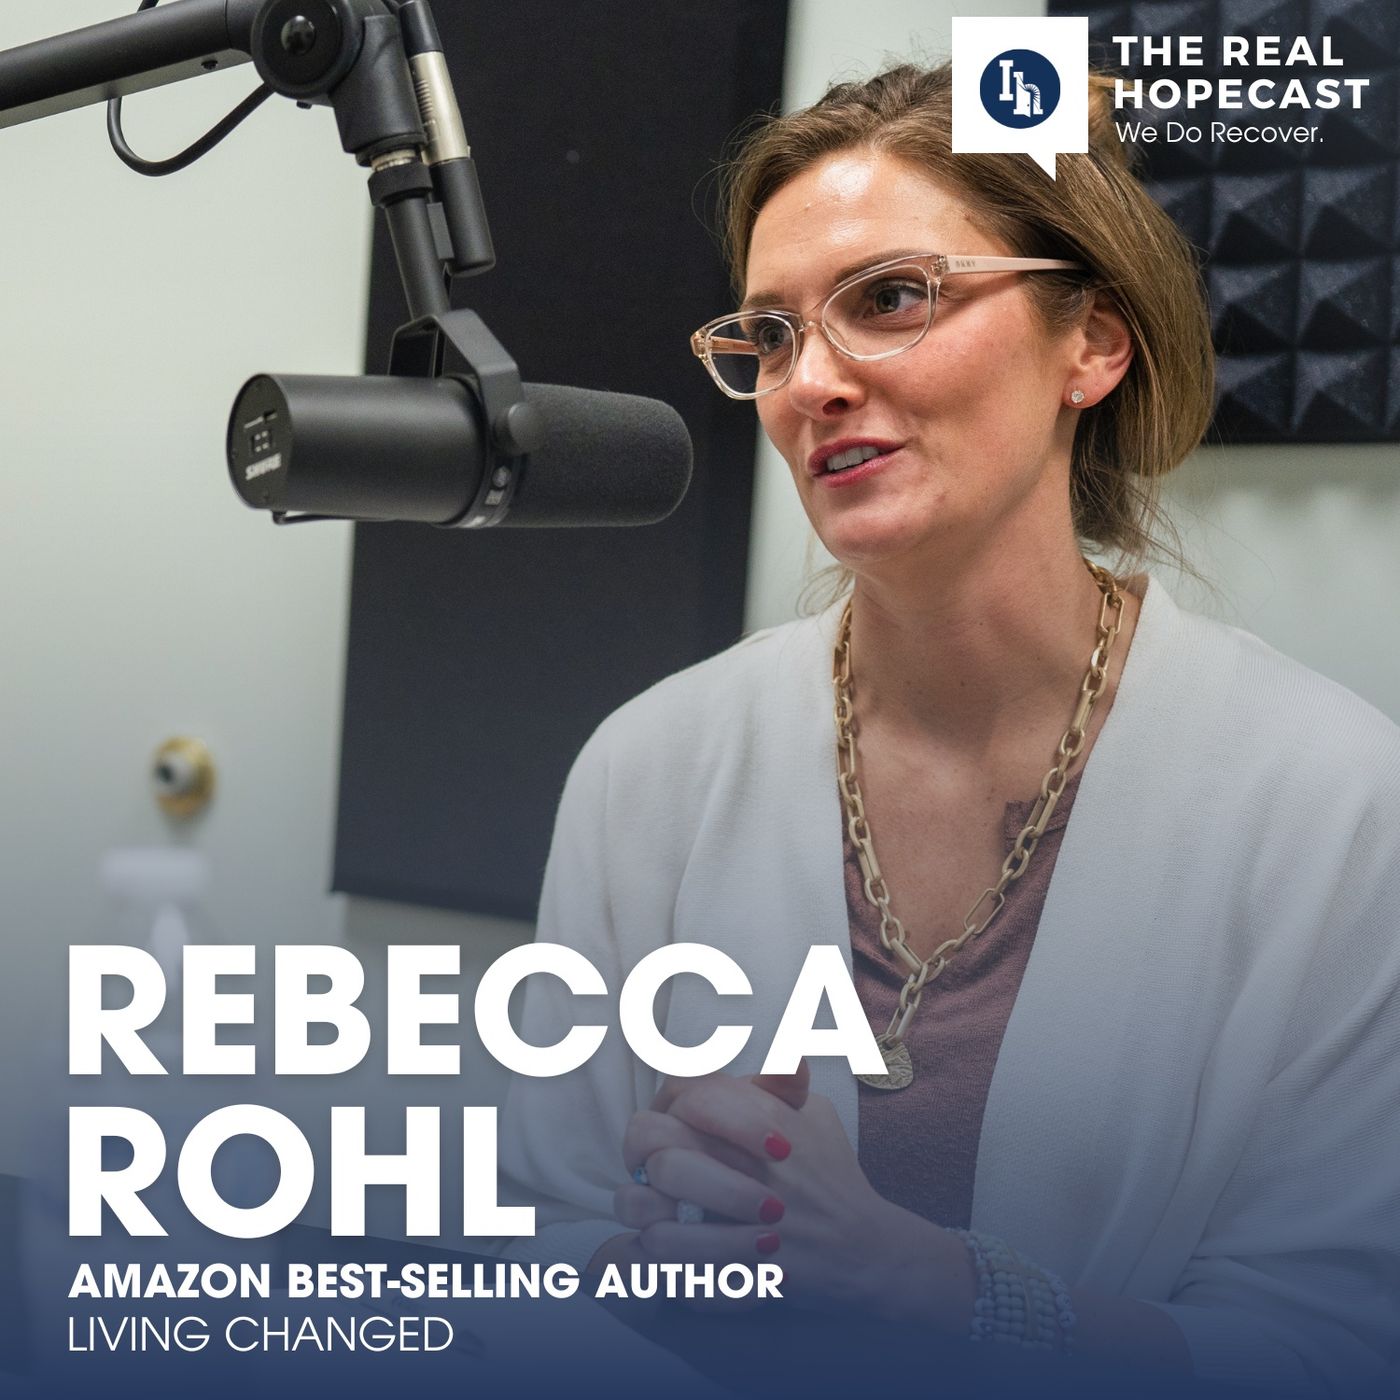 Living Changed – Rebecca Rohl, Amazon Best-Selling Author